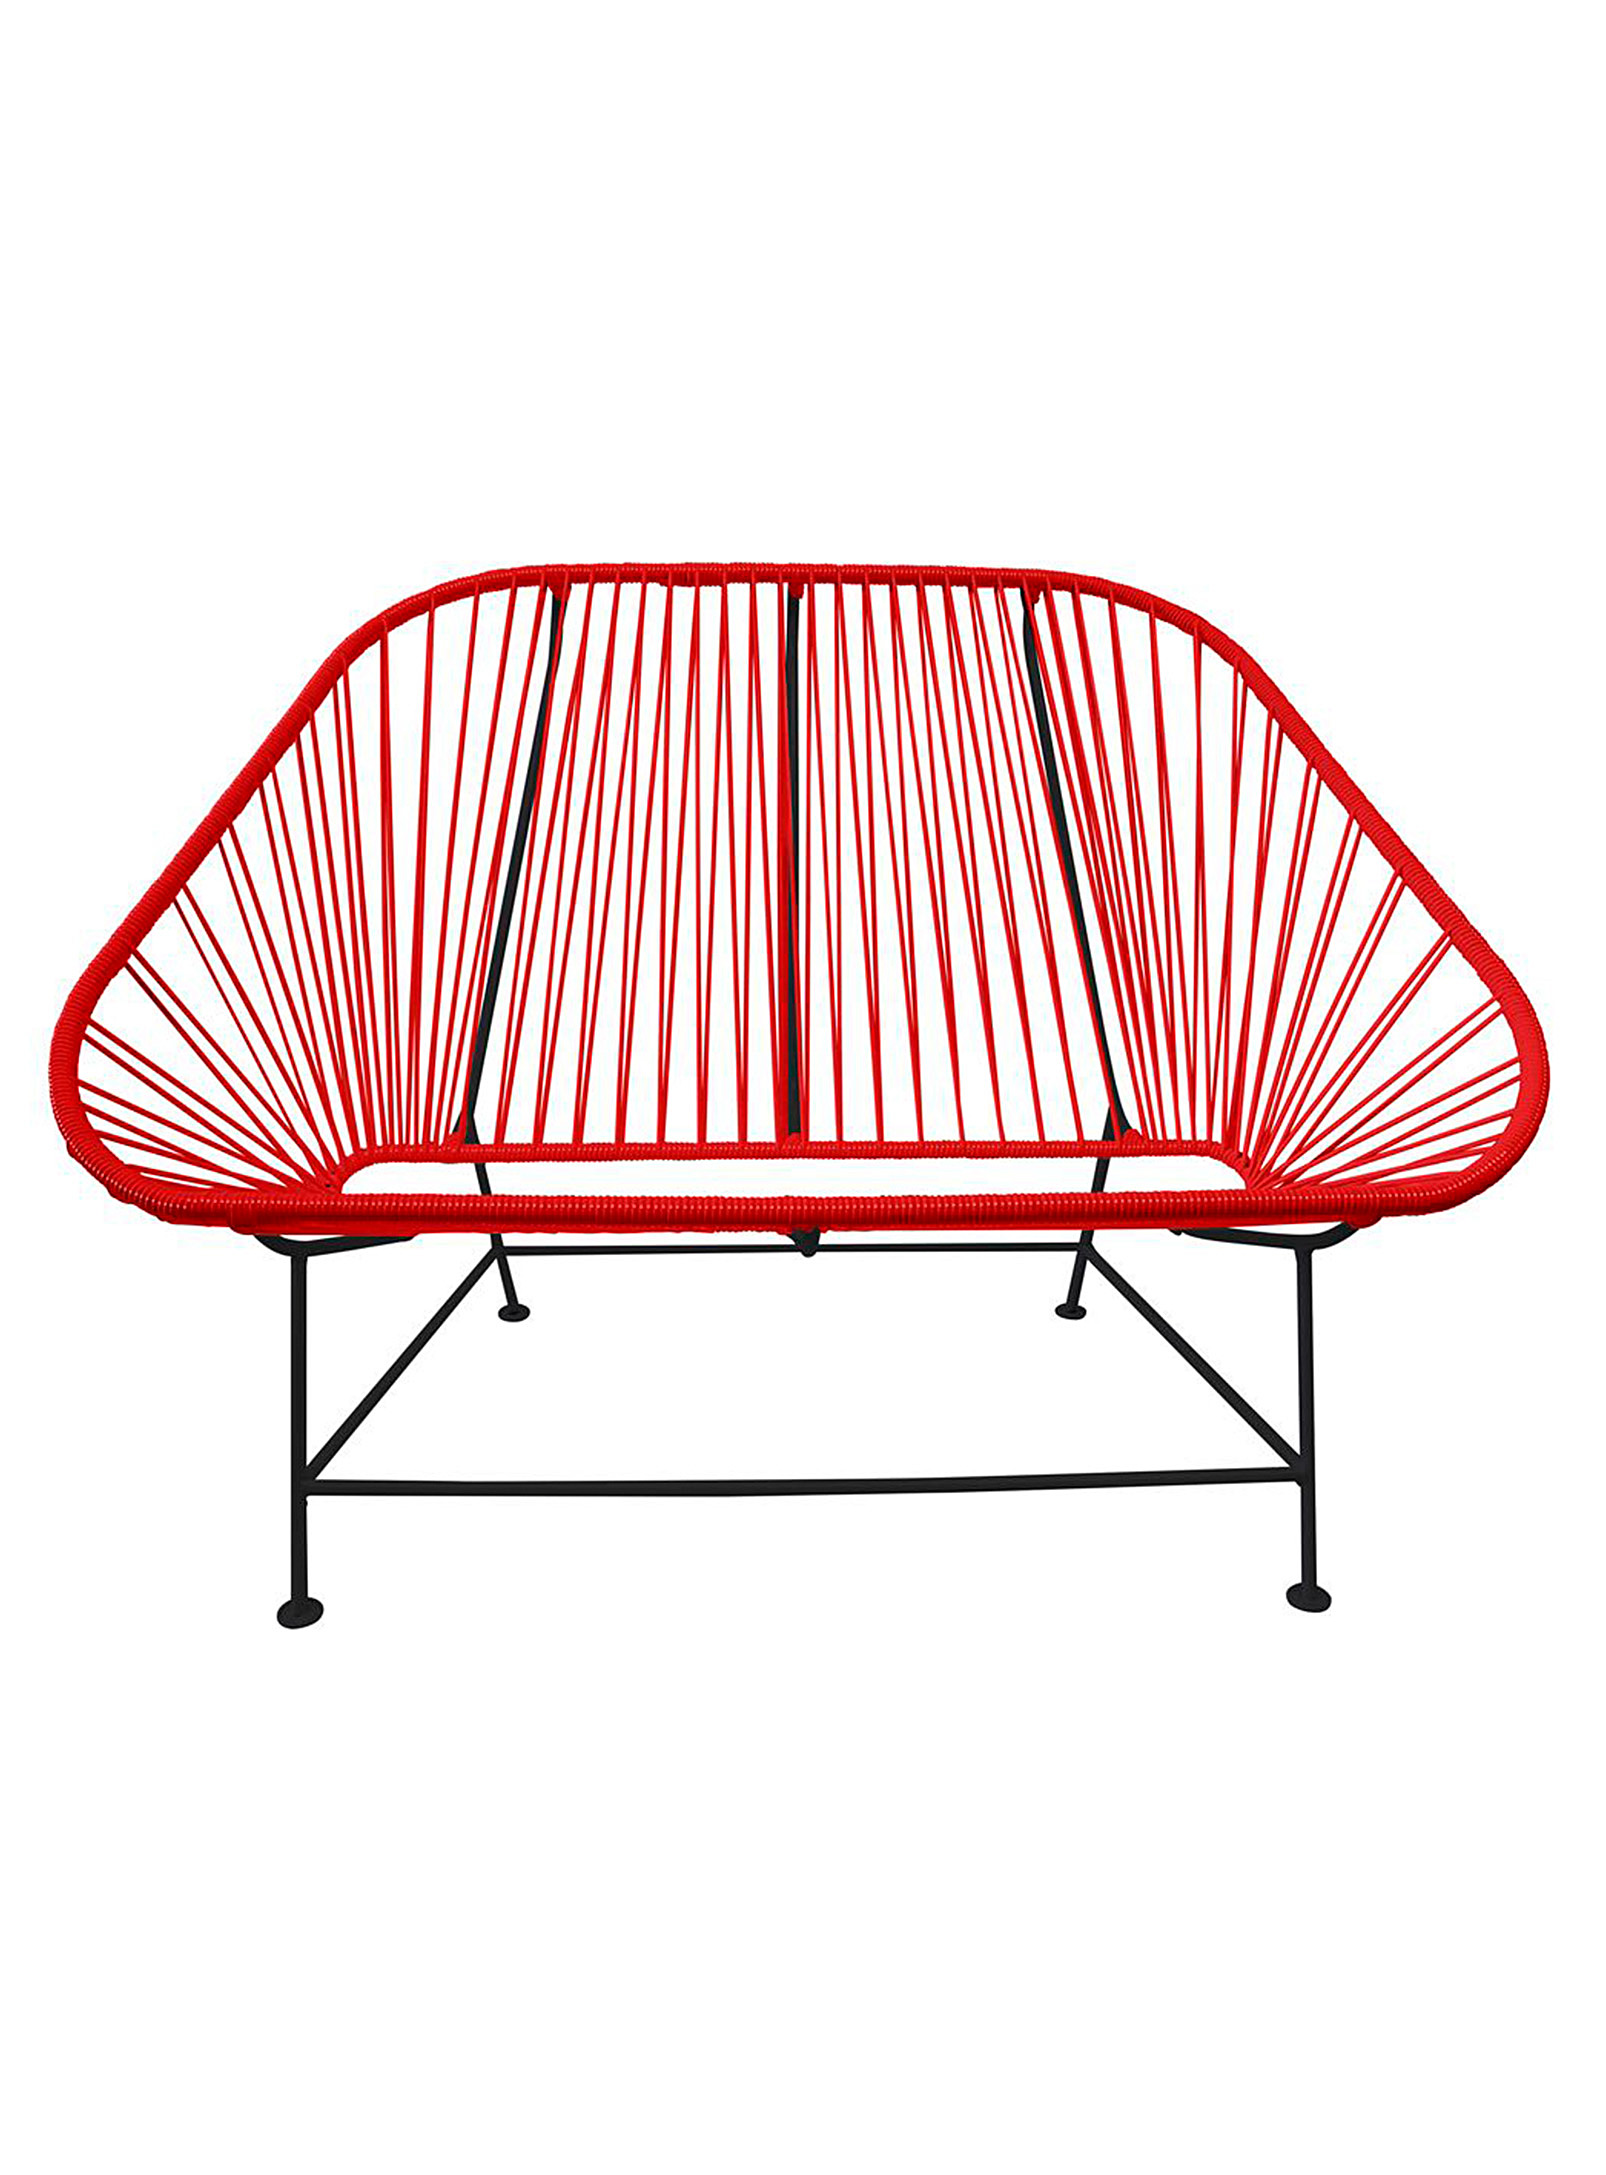 Simons Maison Inlove Outdoor Bench In Red